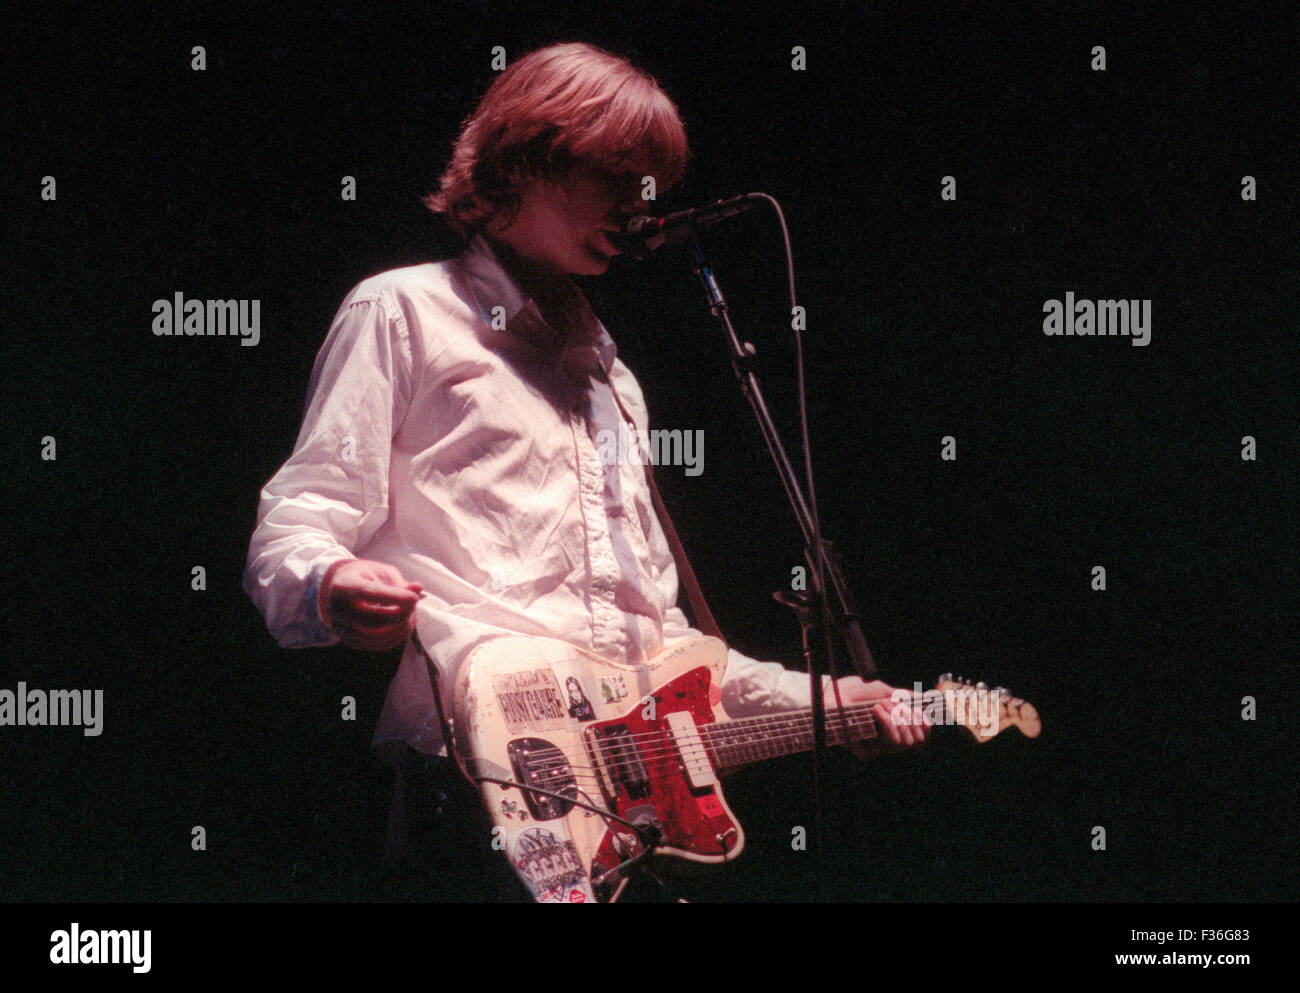 Thurston Moore Of Sonic Youth Performs During The 1995 Lollapalooza Concert At Deer Creek Music Center In Noblesville Indiana Stock Photo Alamy